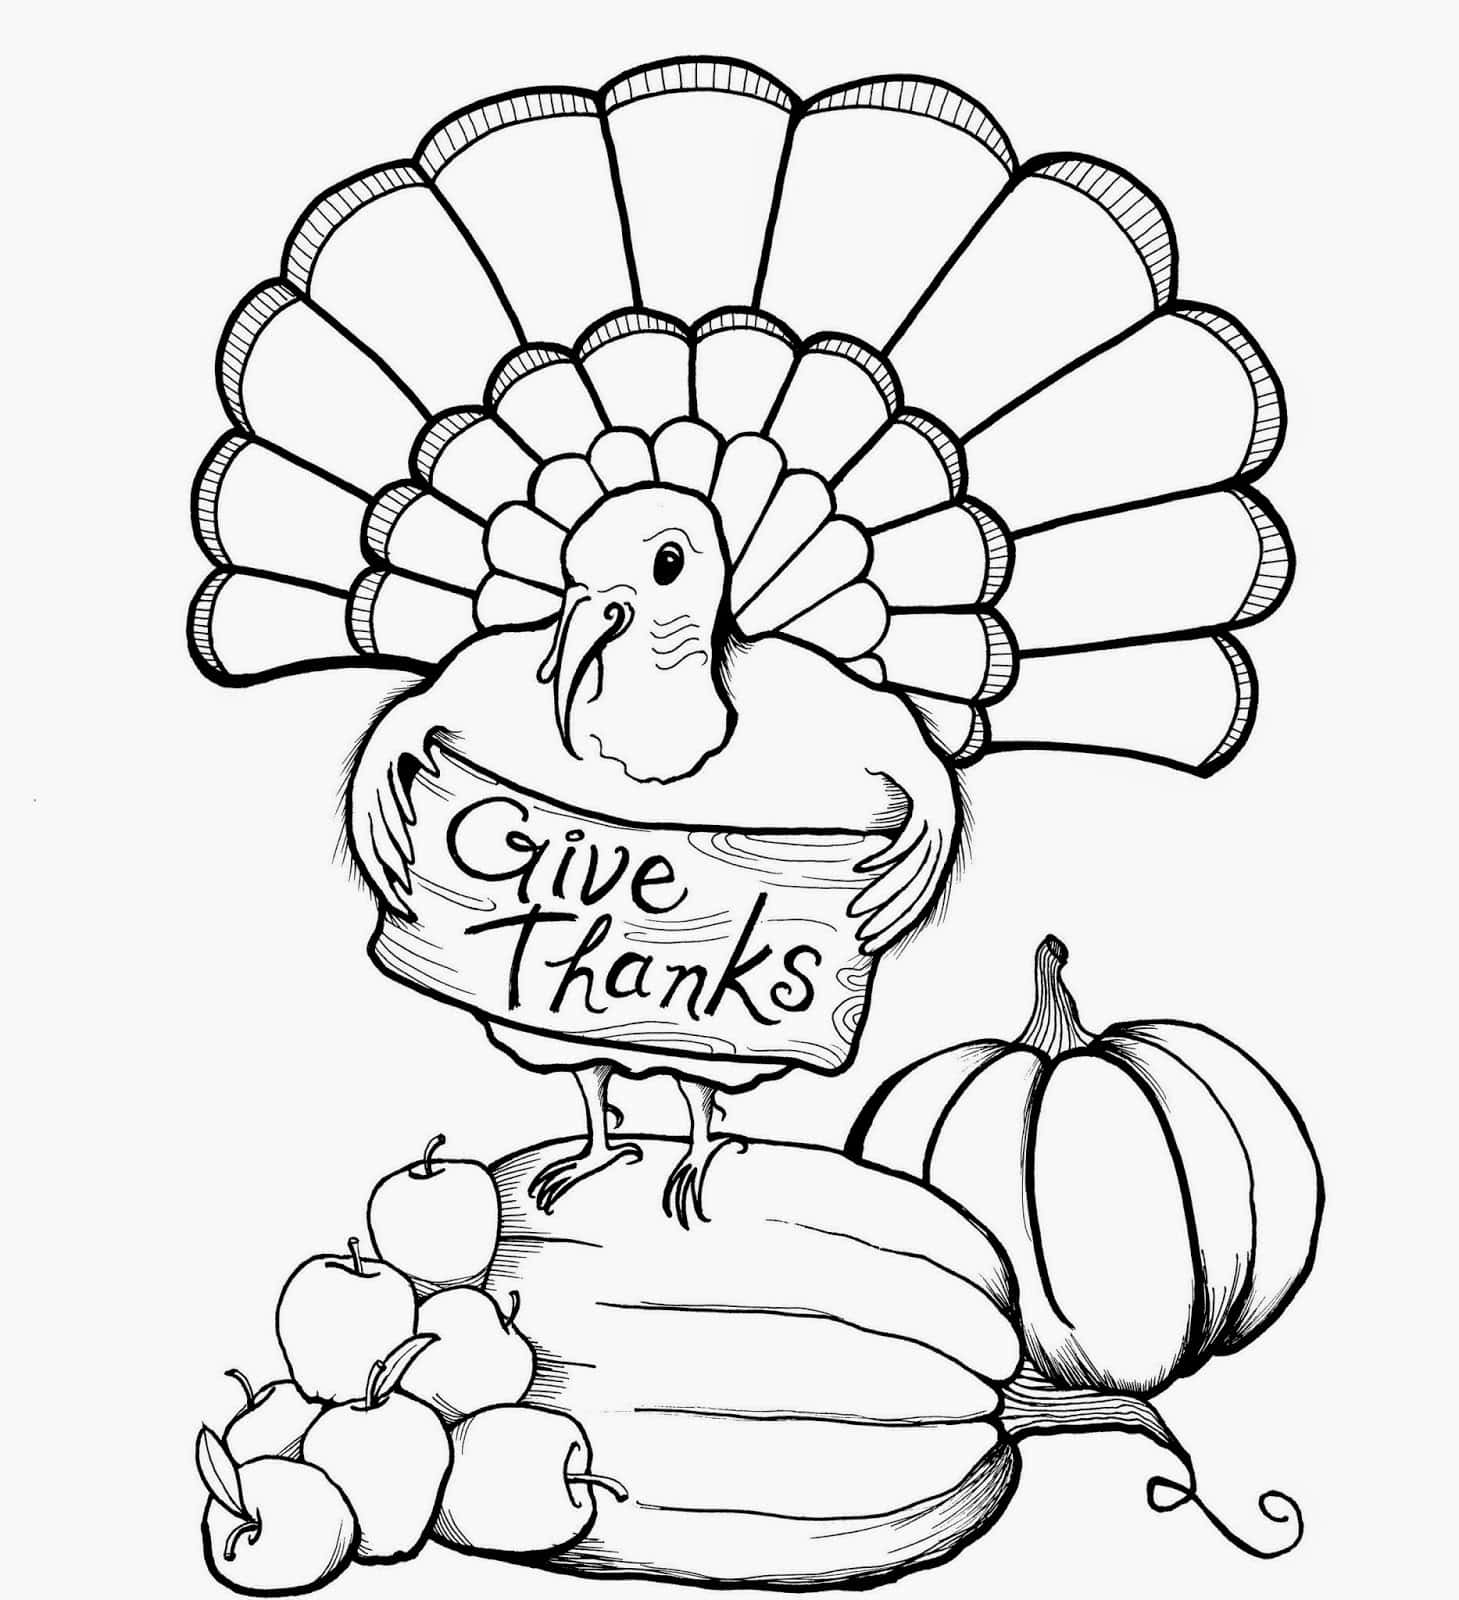 "Get kids excited for the Thanksgiving holiday with this festive coloring page"